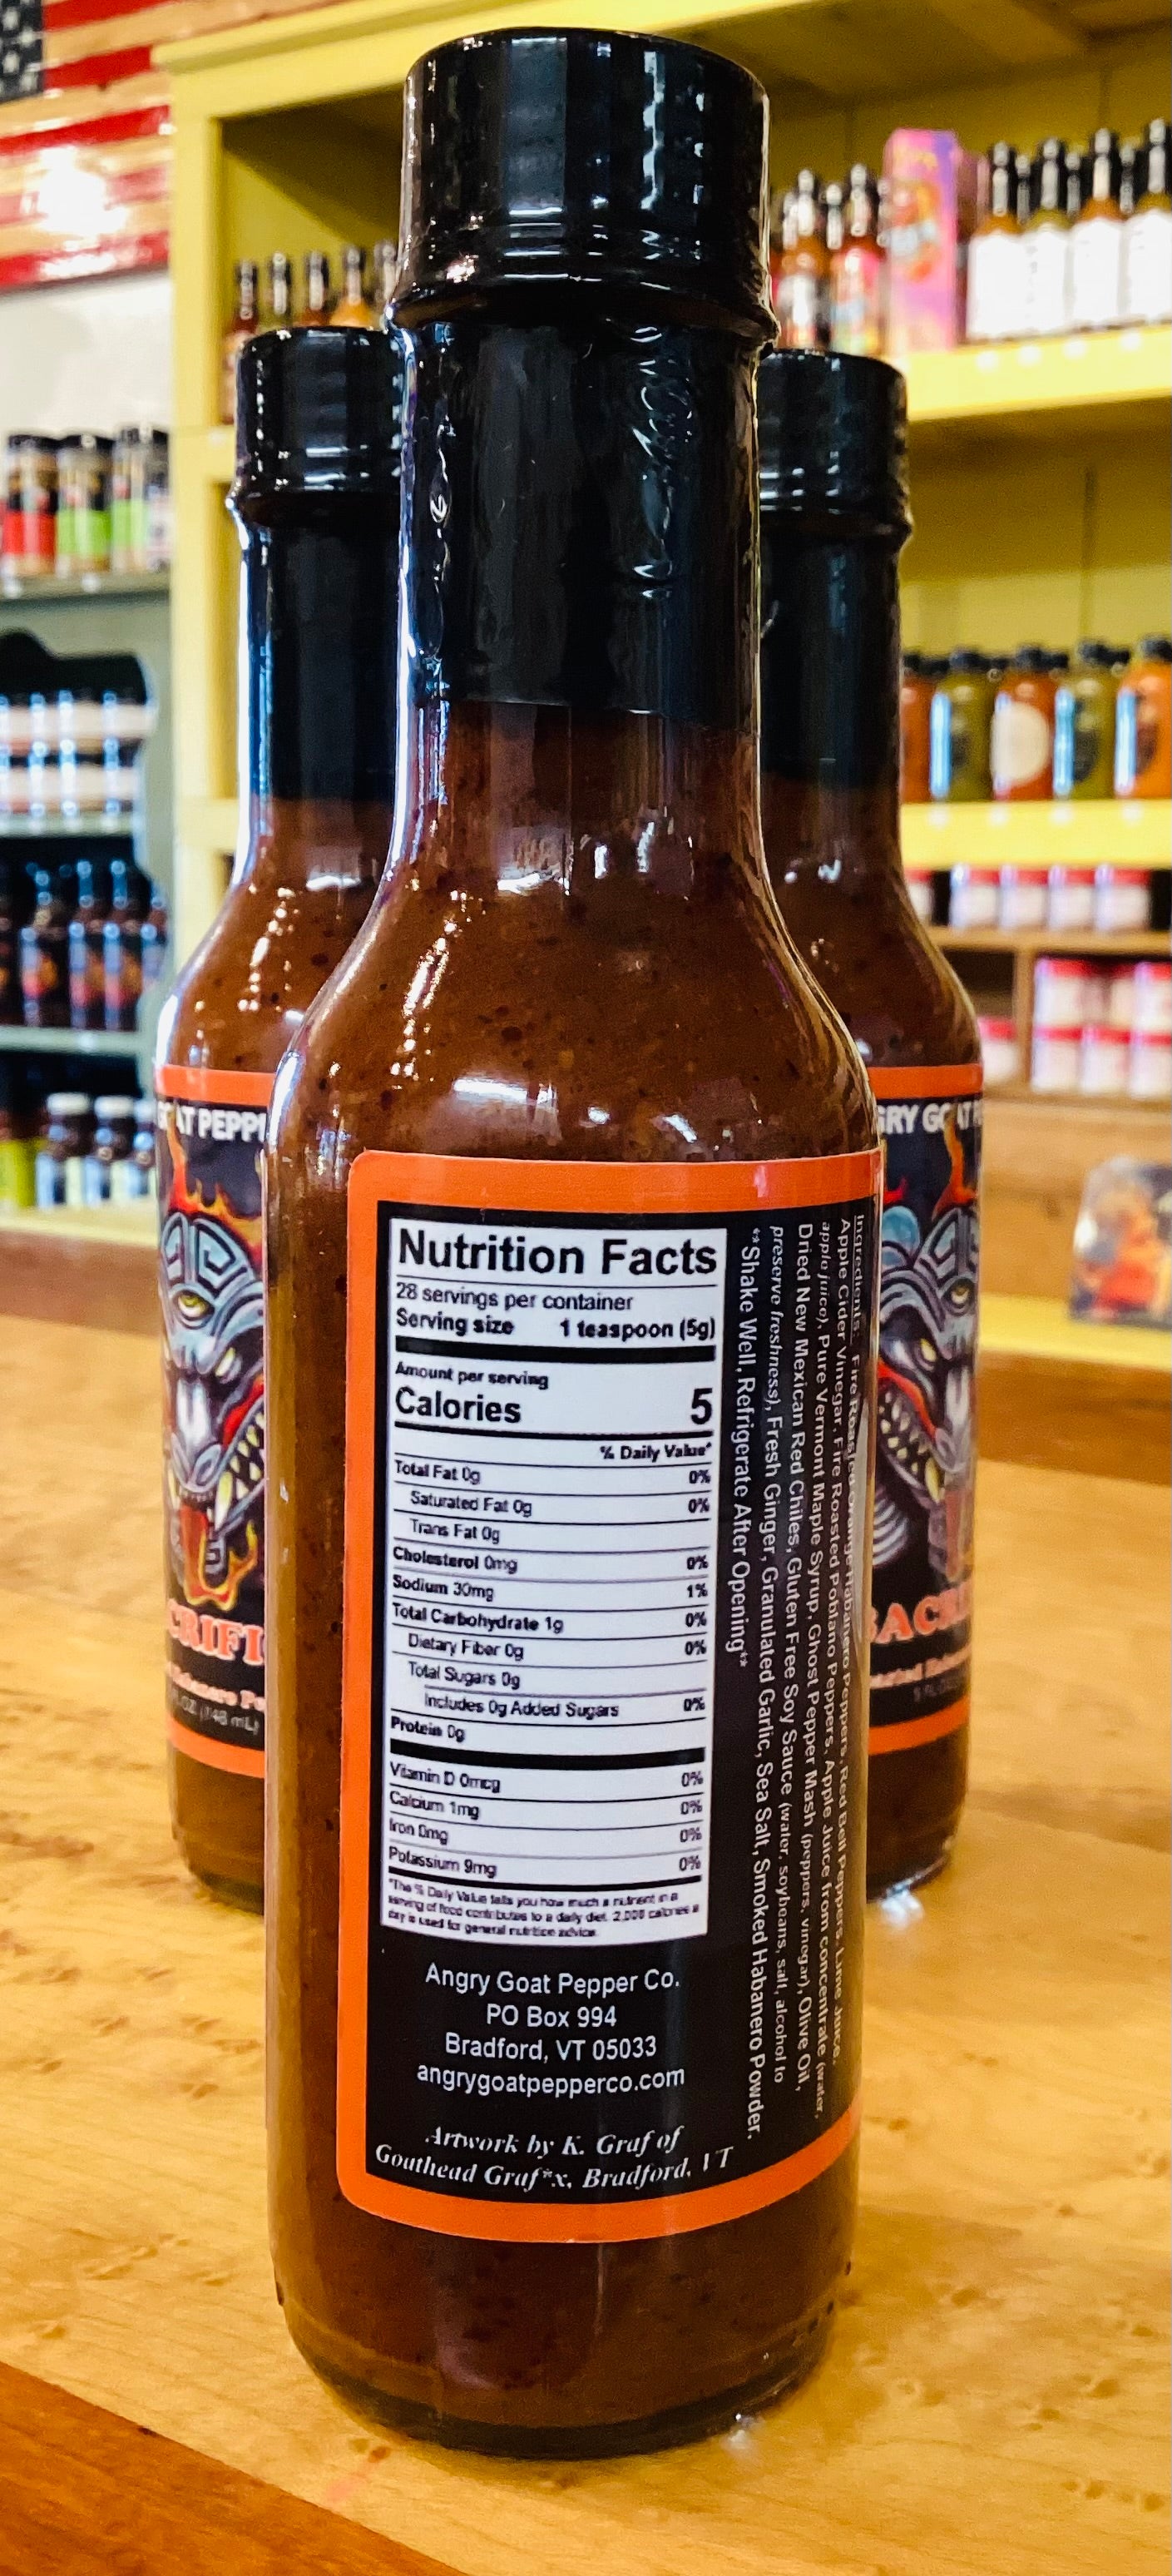 Angry Goat Pepper Co. Sacrifice Hot Sauce